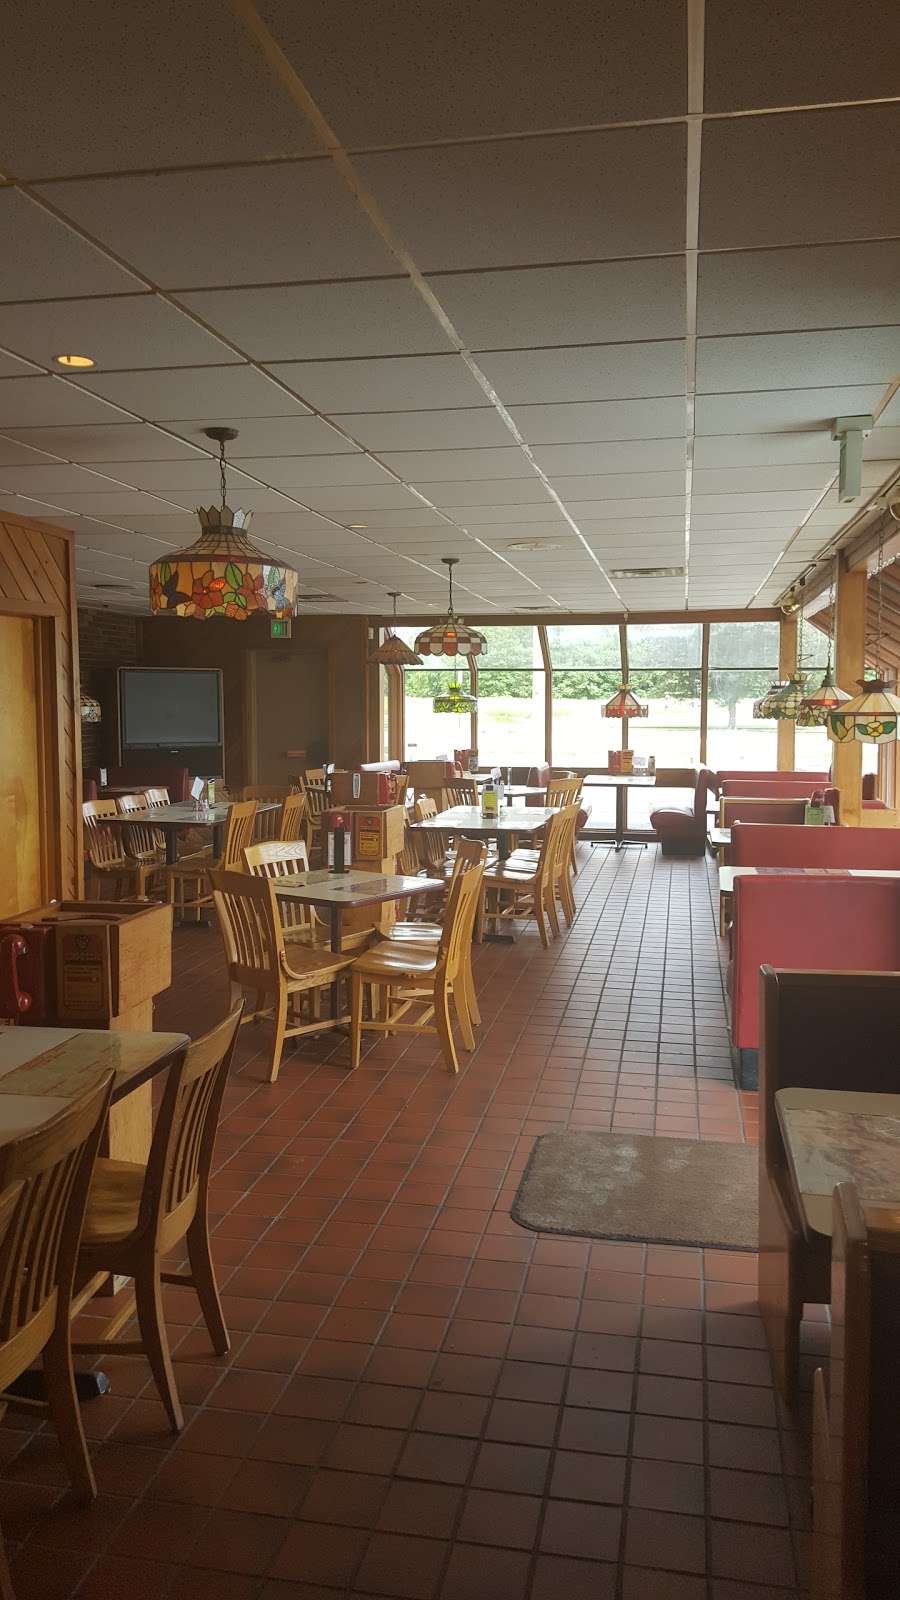 Pizza King | 30 W Grand Ave, Anderson, IN 46012 | Phone: (765) 642-8021